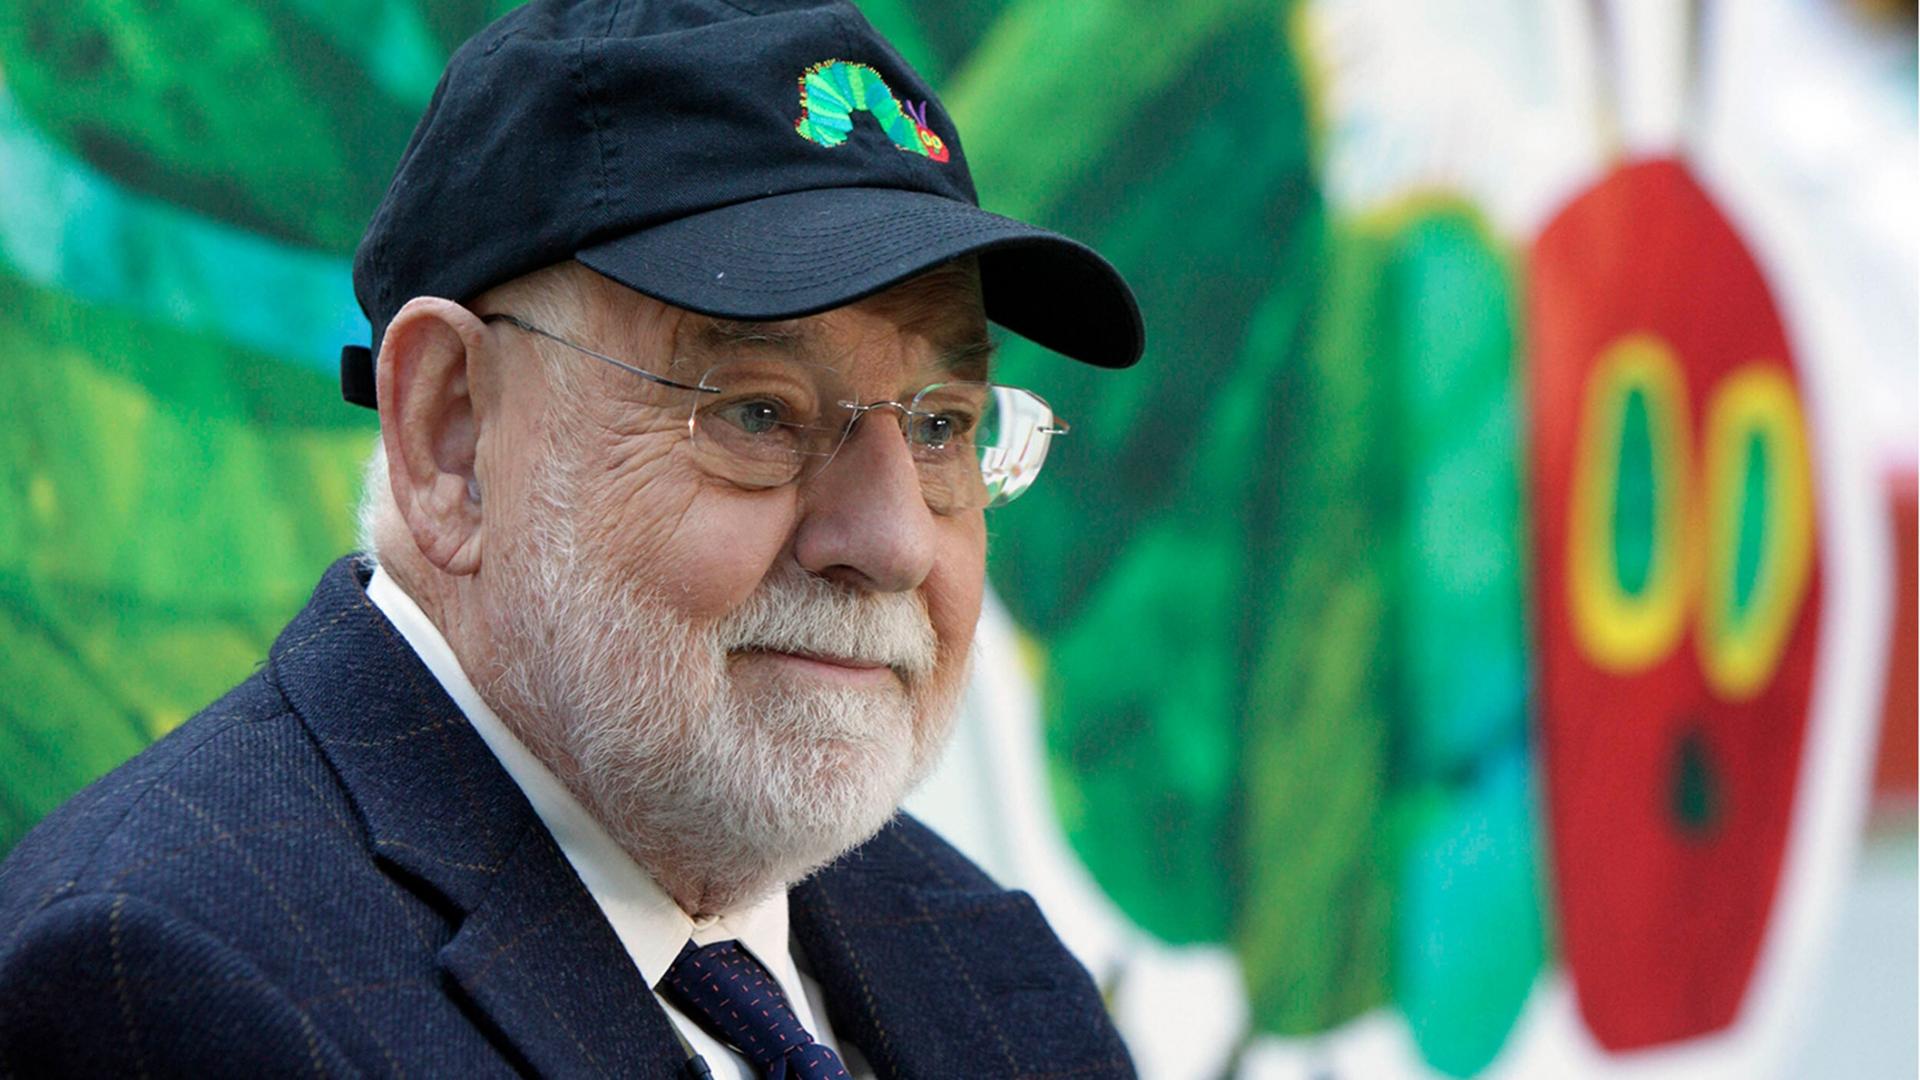 Author Eric Carle is shown with a white beard and warding a suit, tie and baseball hat.